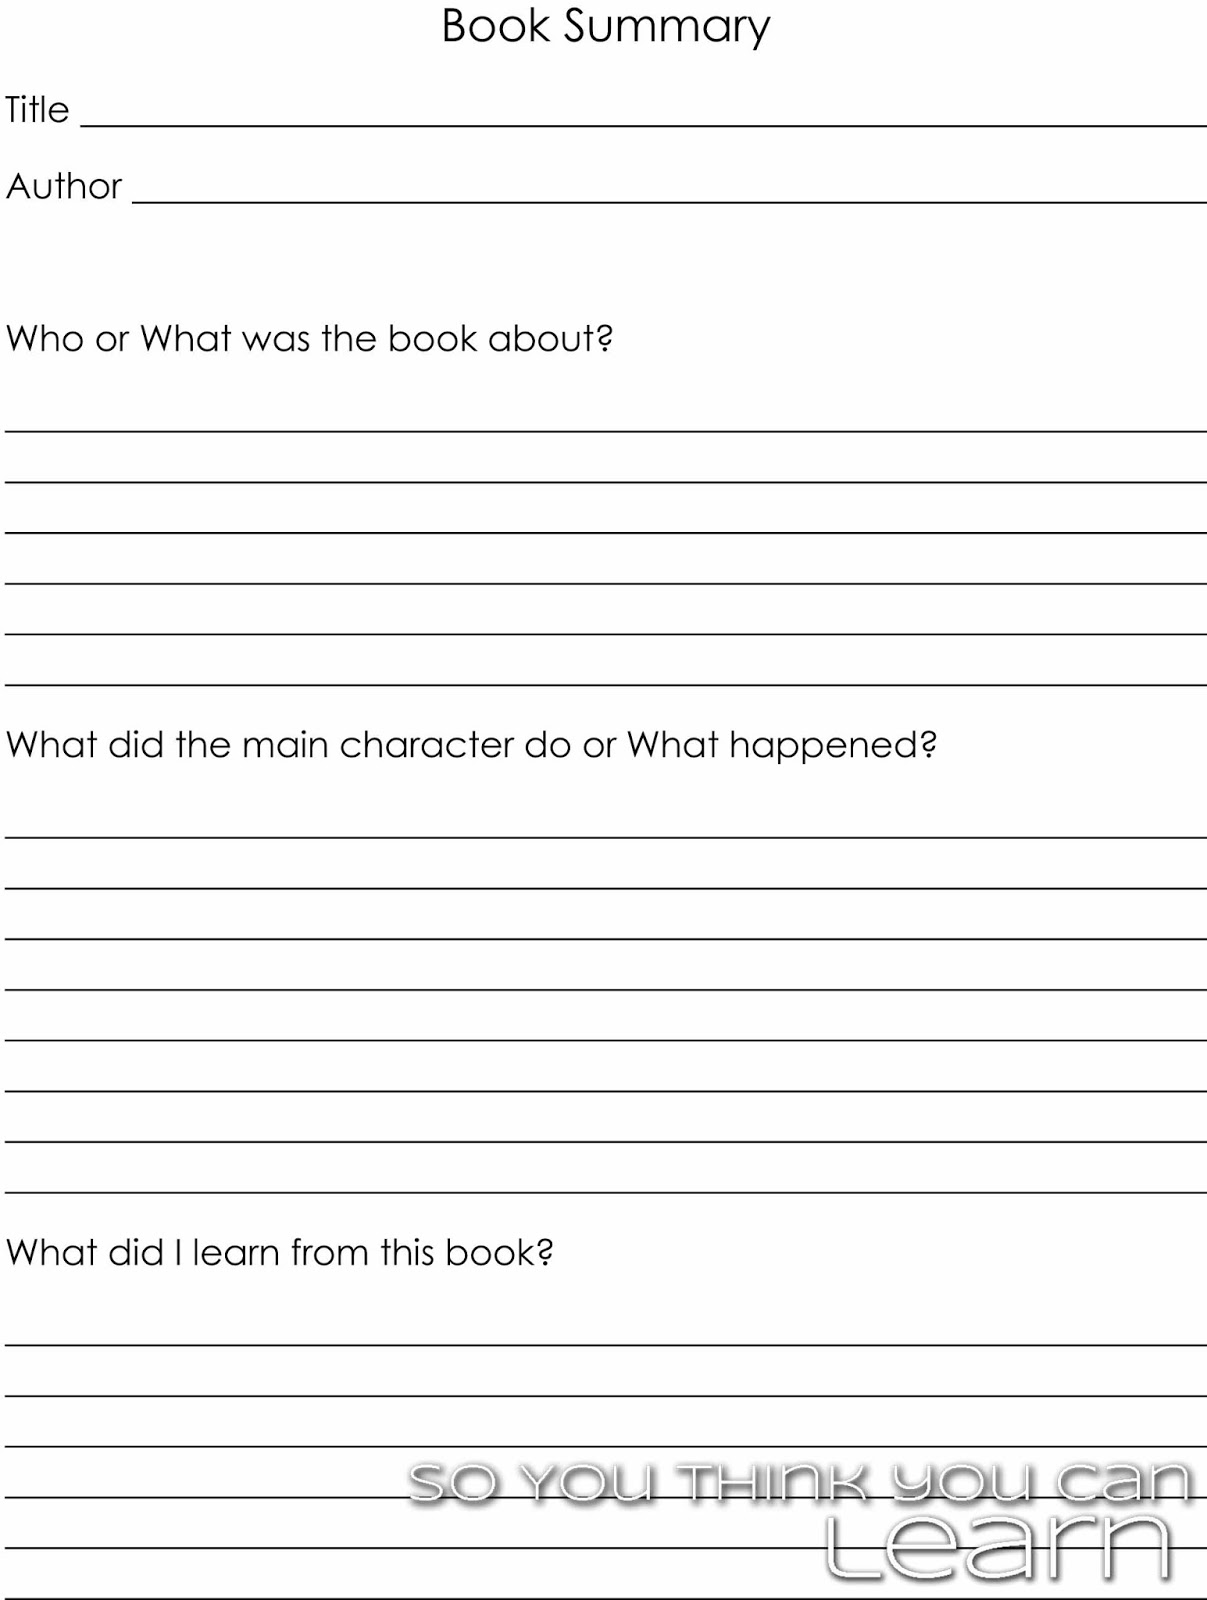 Book report chapter summary template